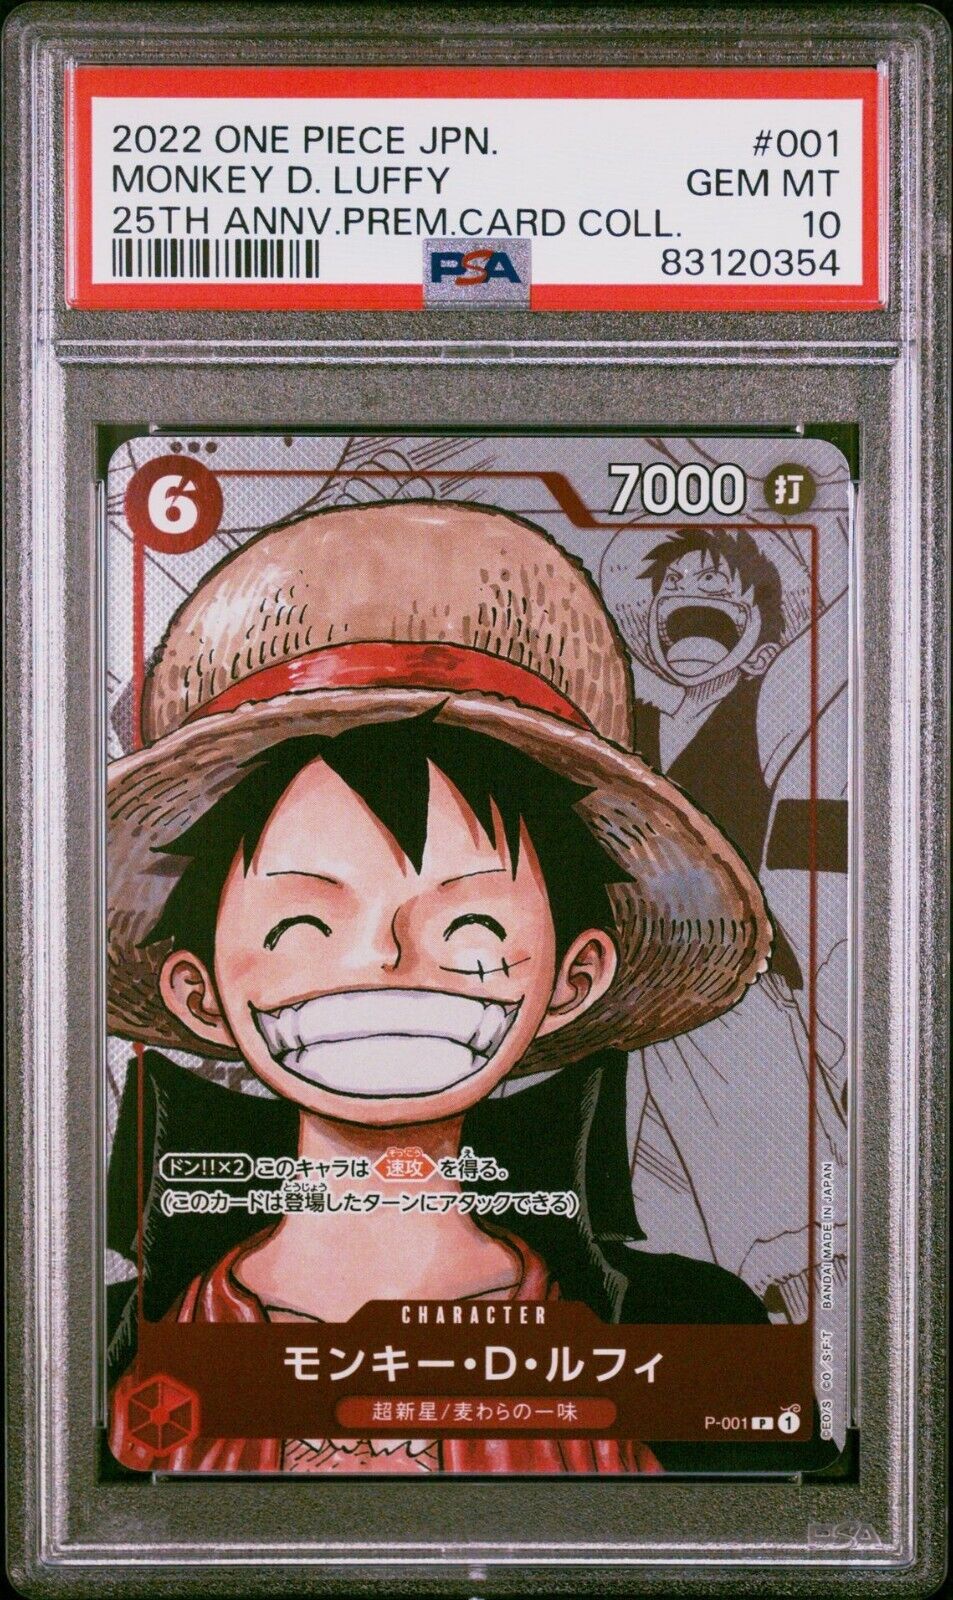 ONE PIECE JAPANESE 25TH ANNIVERSARY PREMIUM CARD COLLECTION 001 LUFFY PSA 10